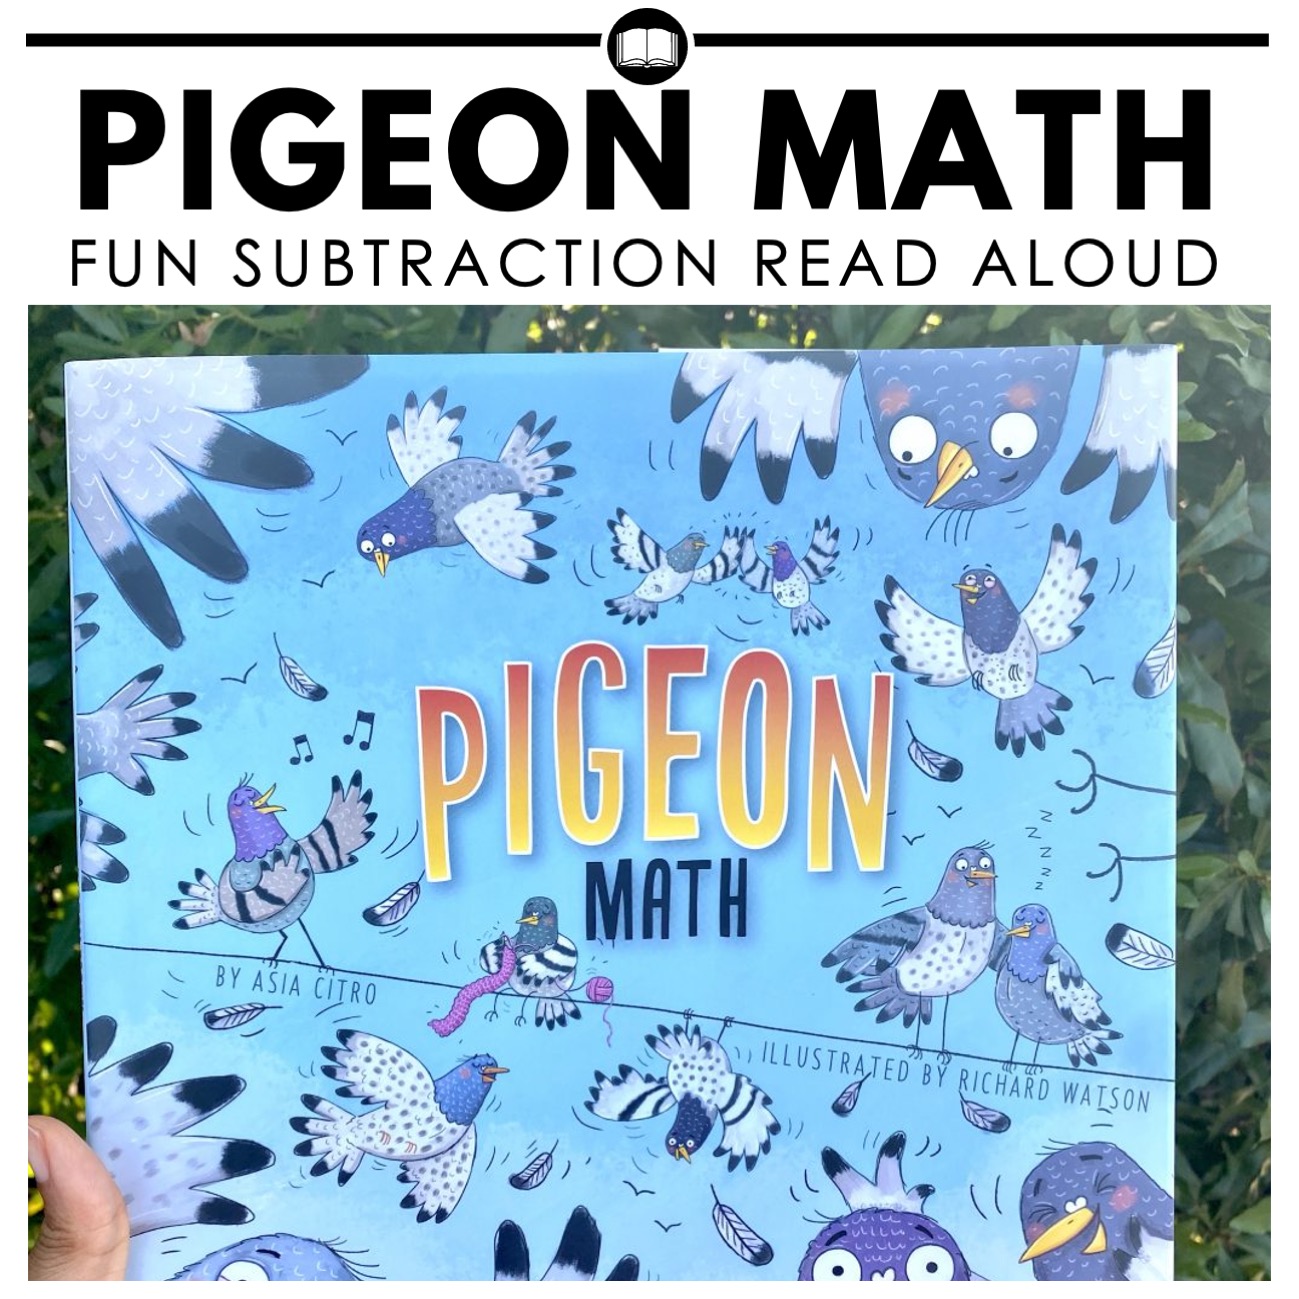 Pigeon Math Book Review and Subtraction Activity